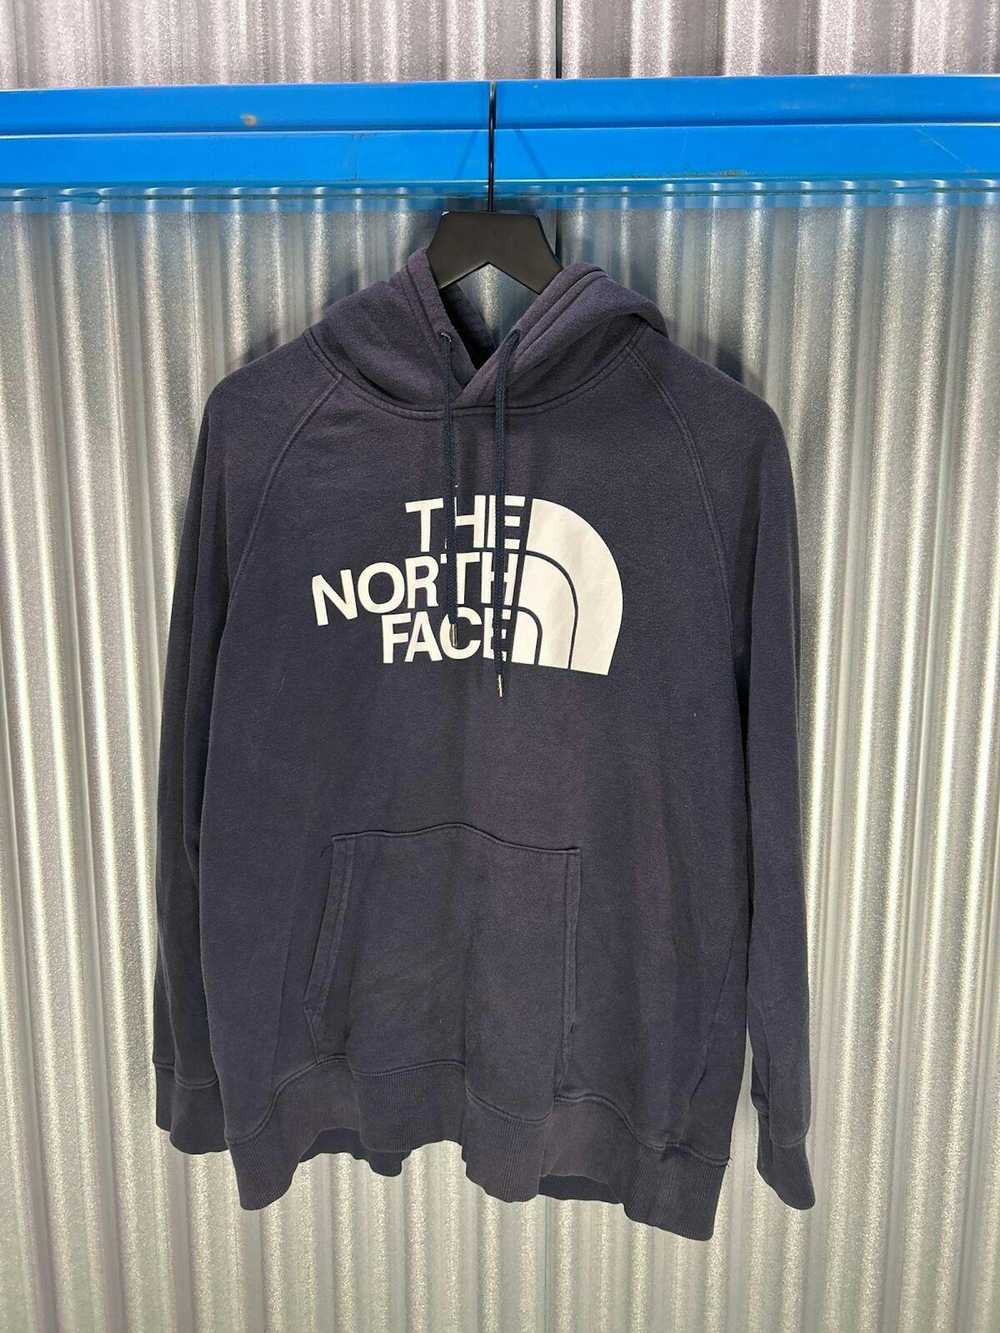 Designer The North Face Classic Navy Hoodie - image 6